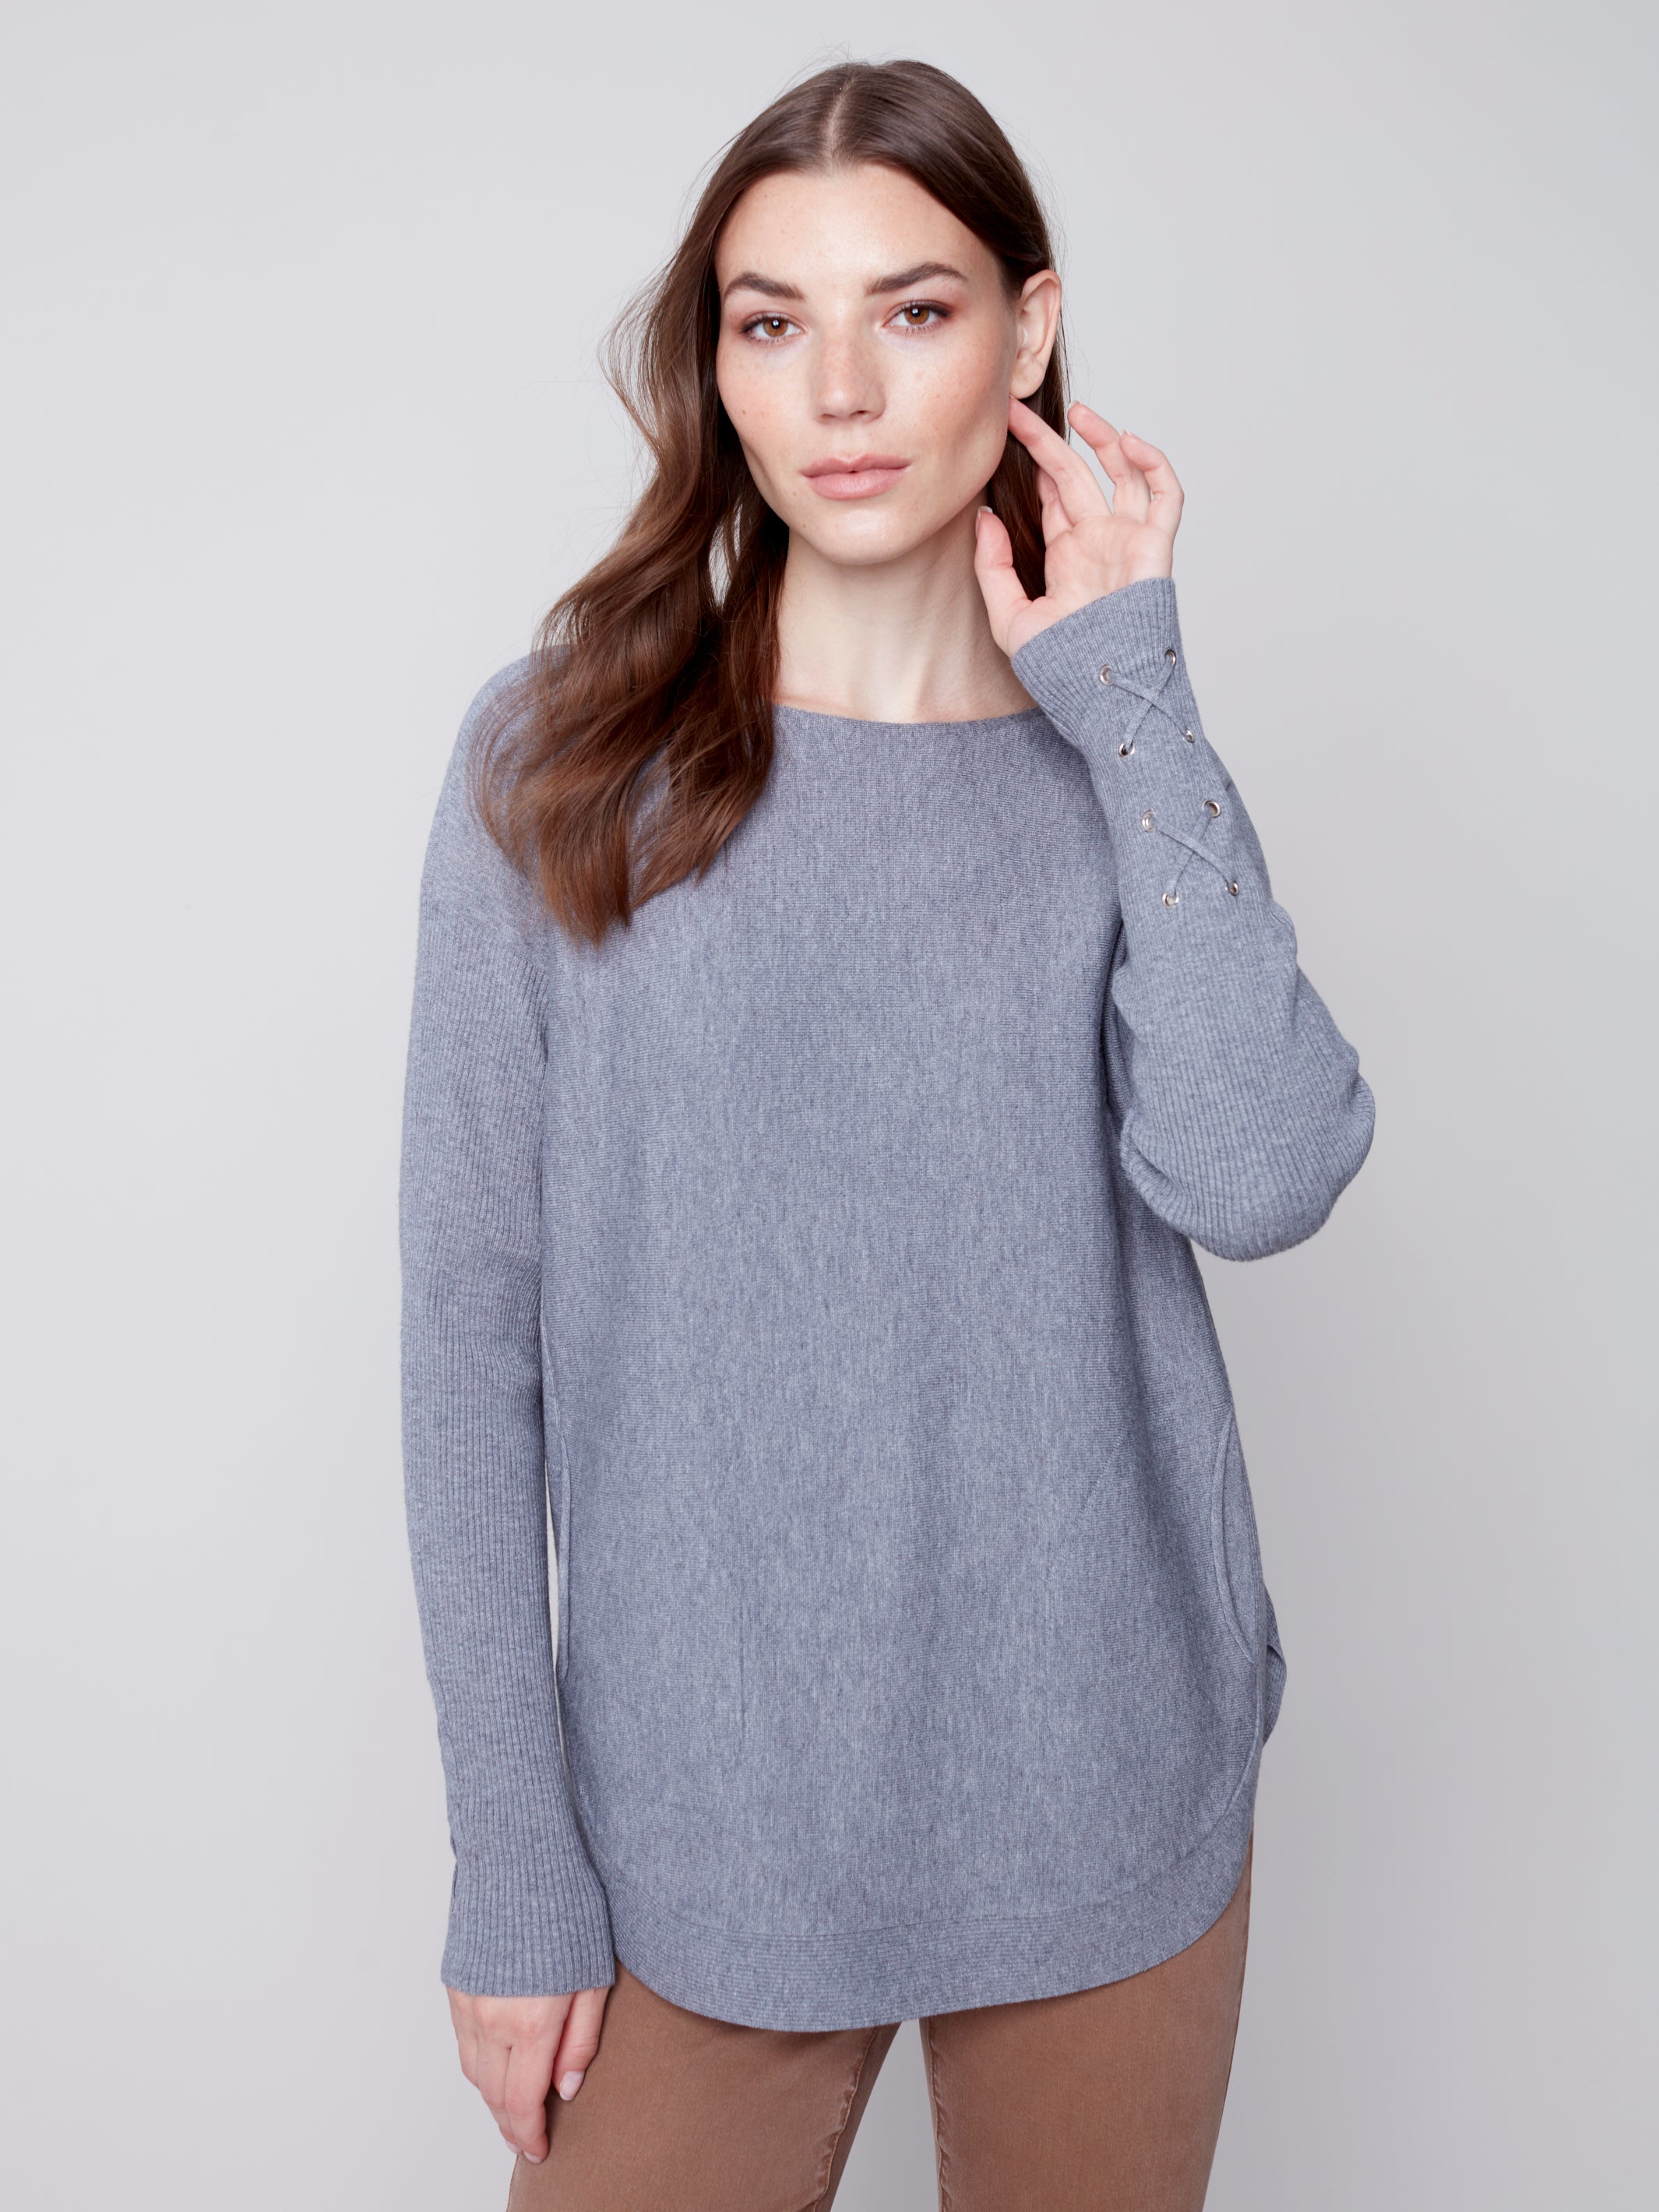 Sweater with Criss Cross Sleeve Detail - Grey